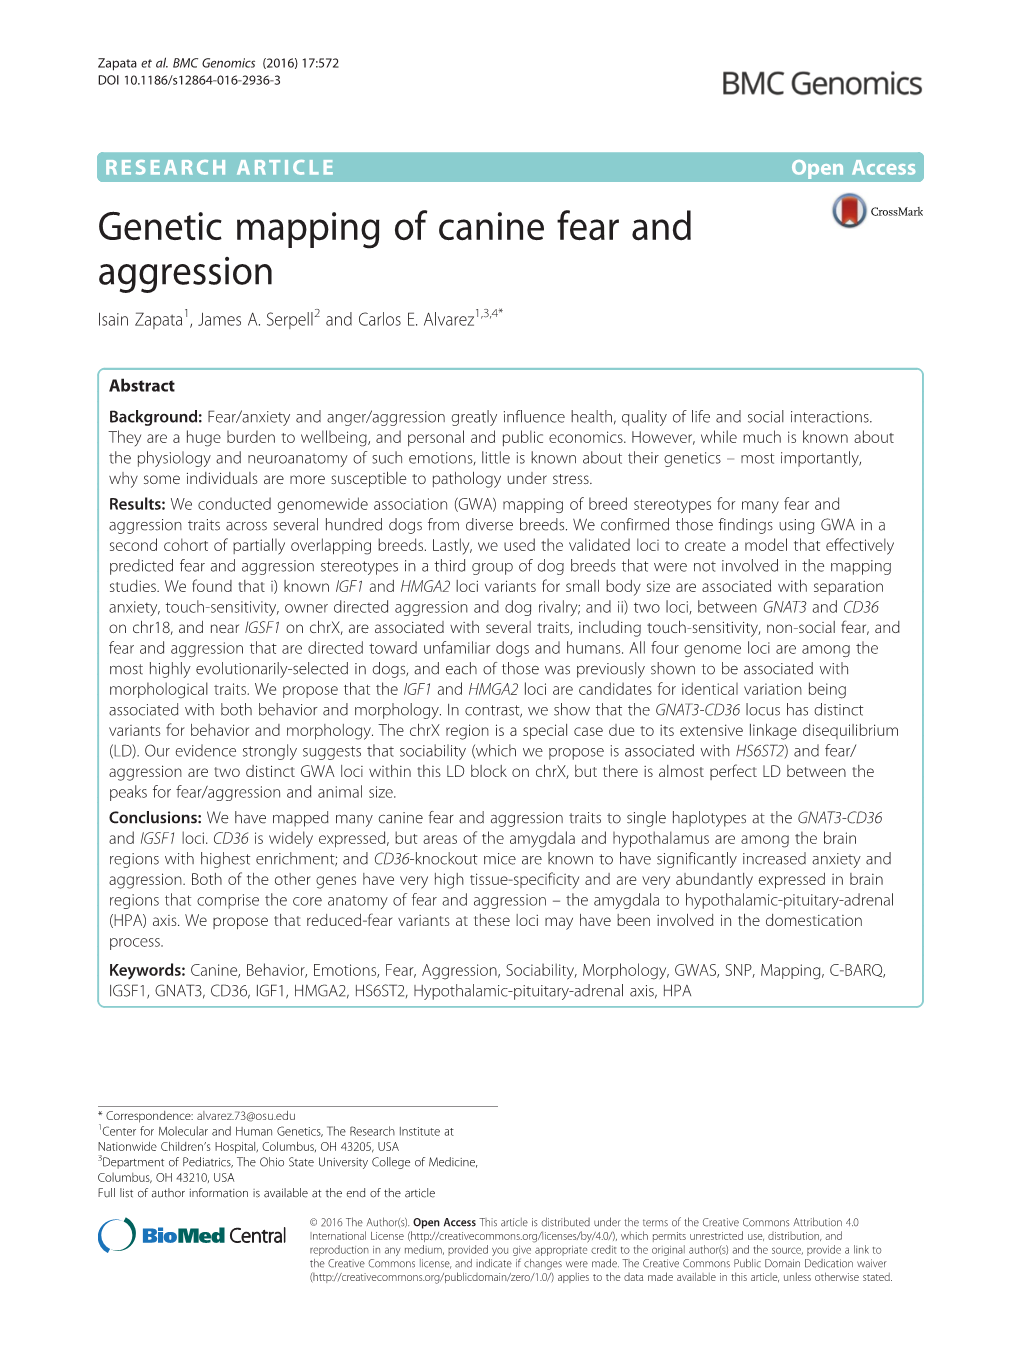 Genetic Mapping of Canine Fear and Aggression Isain Zapata1, James A